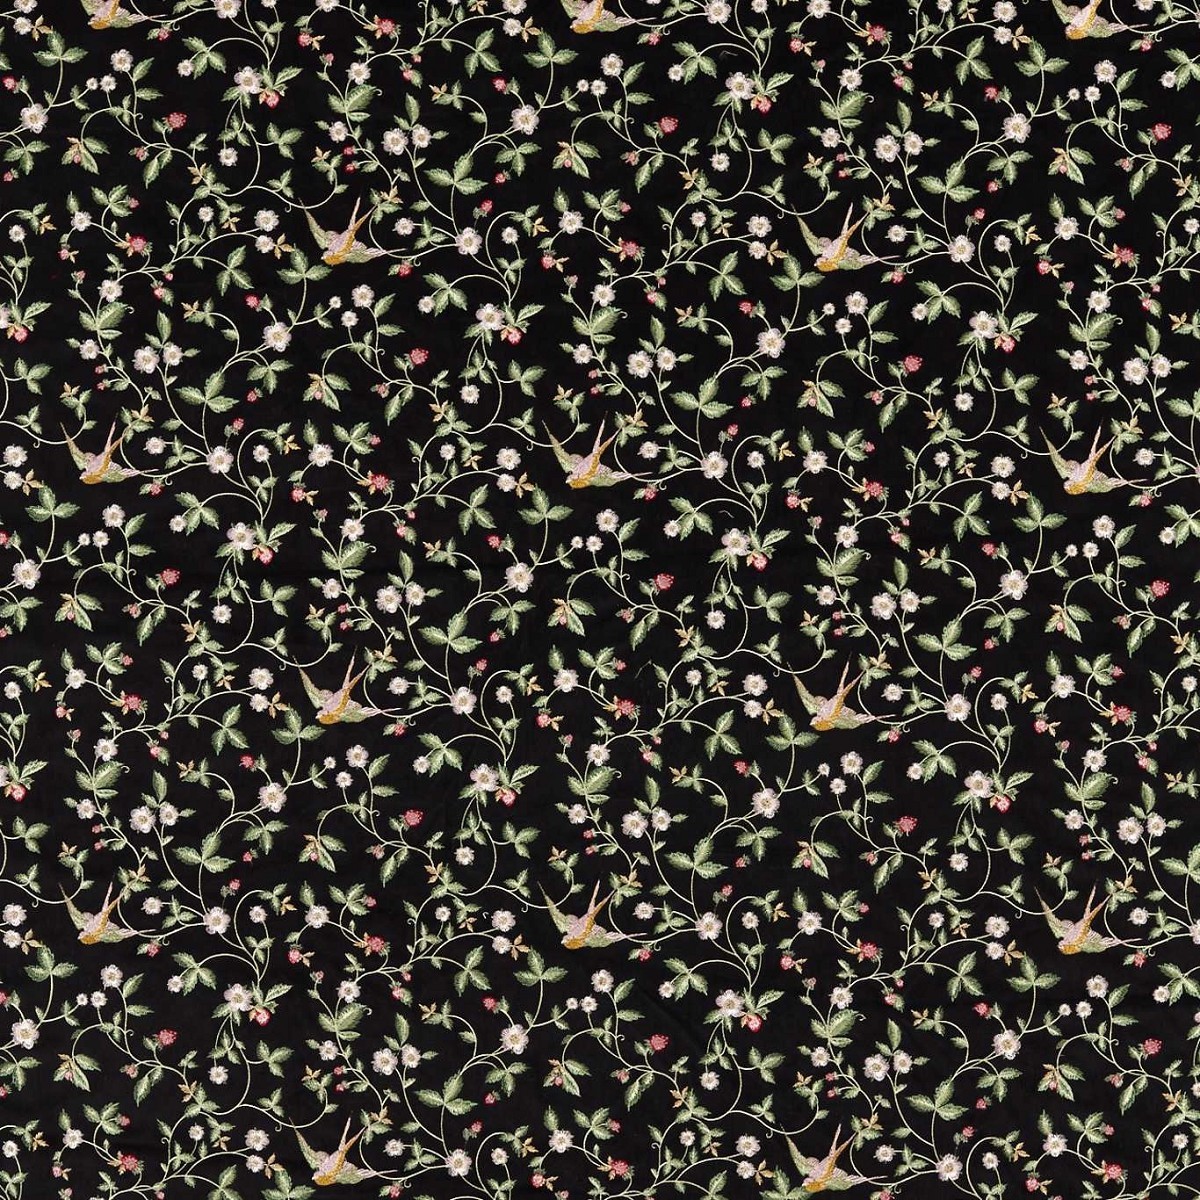 Wild Strawberry Noir Embroidery Fabric by Wedgwood